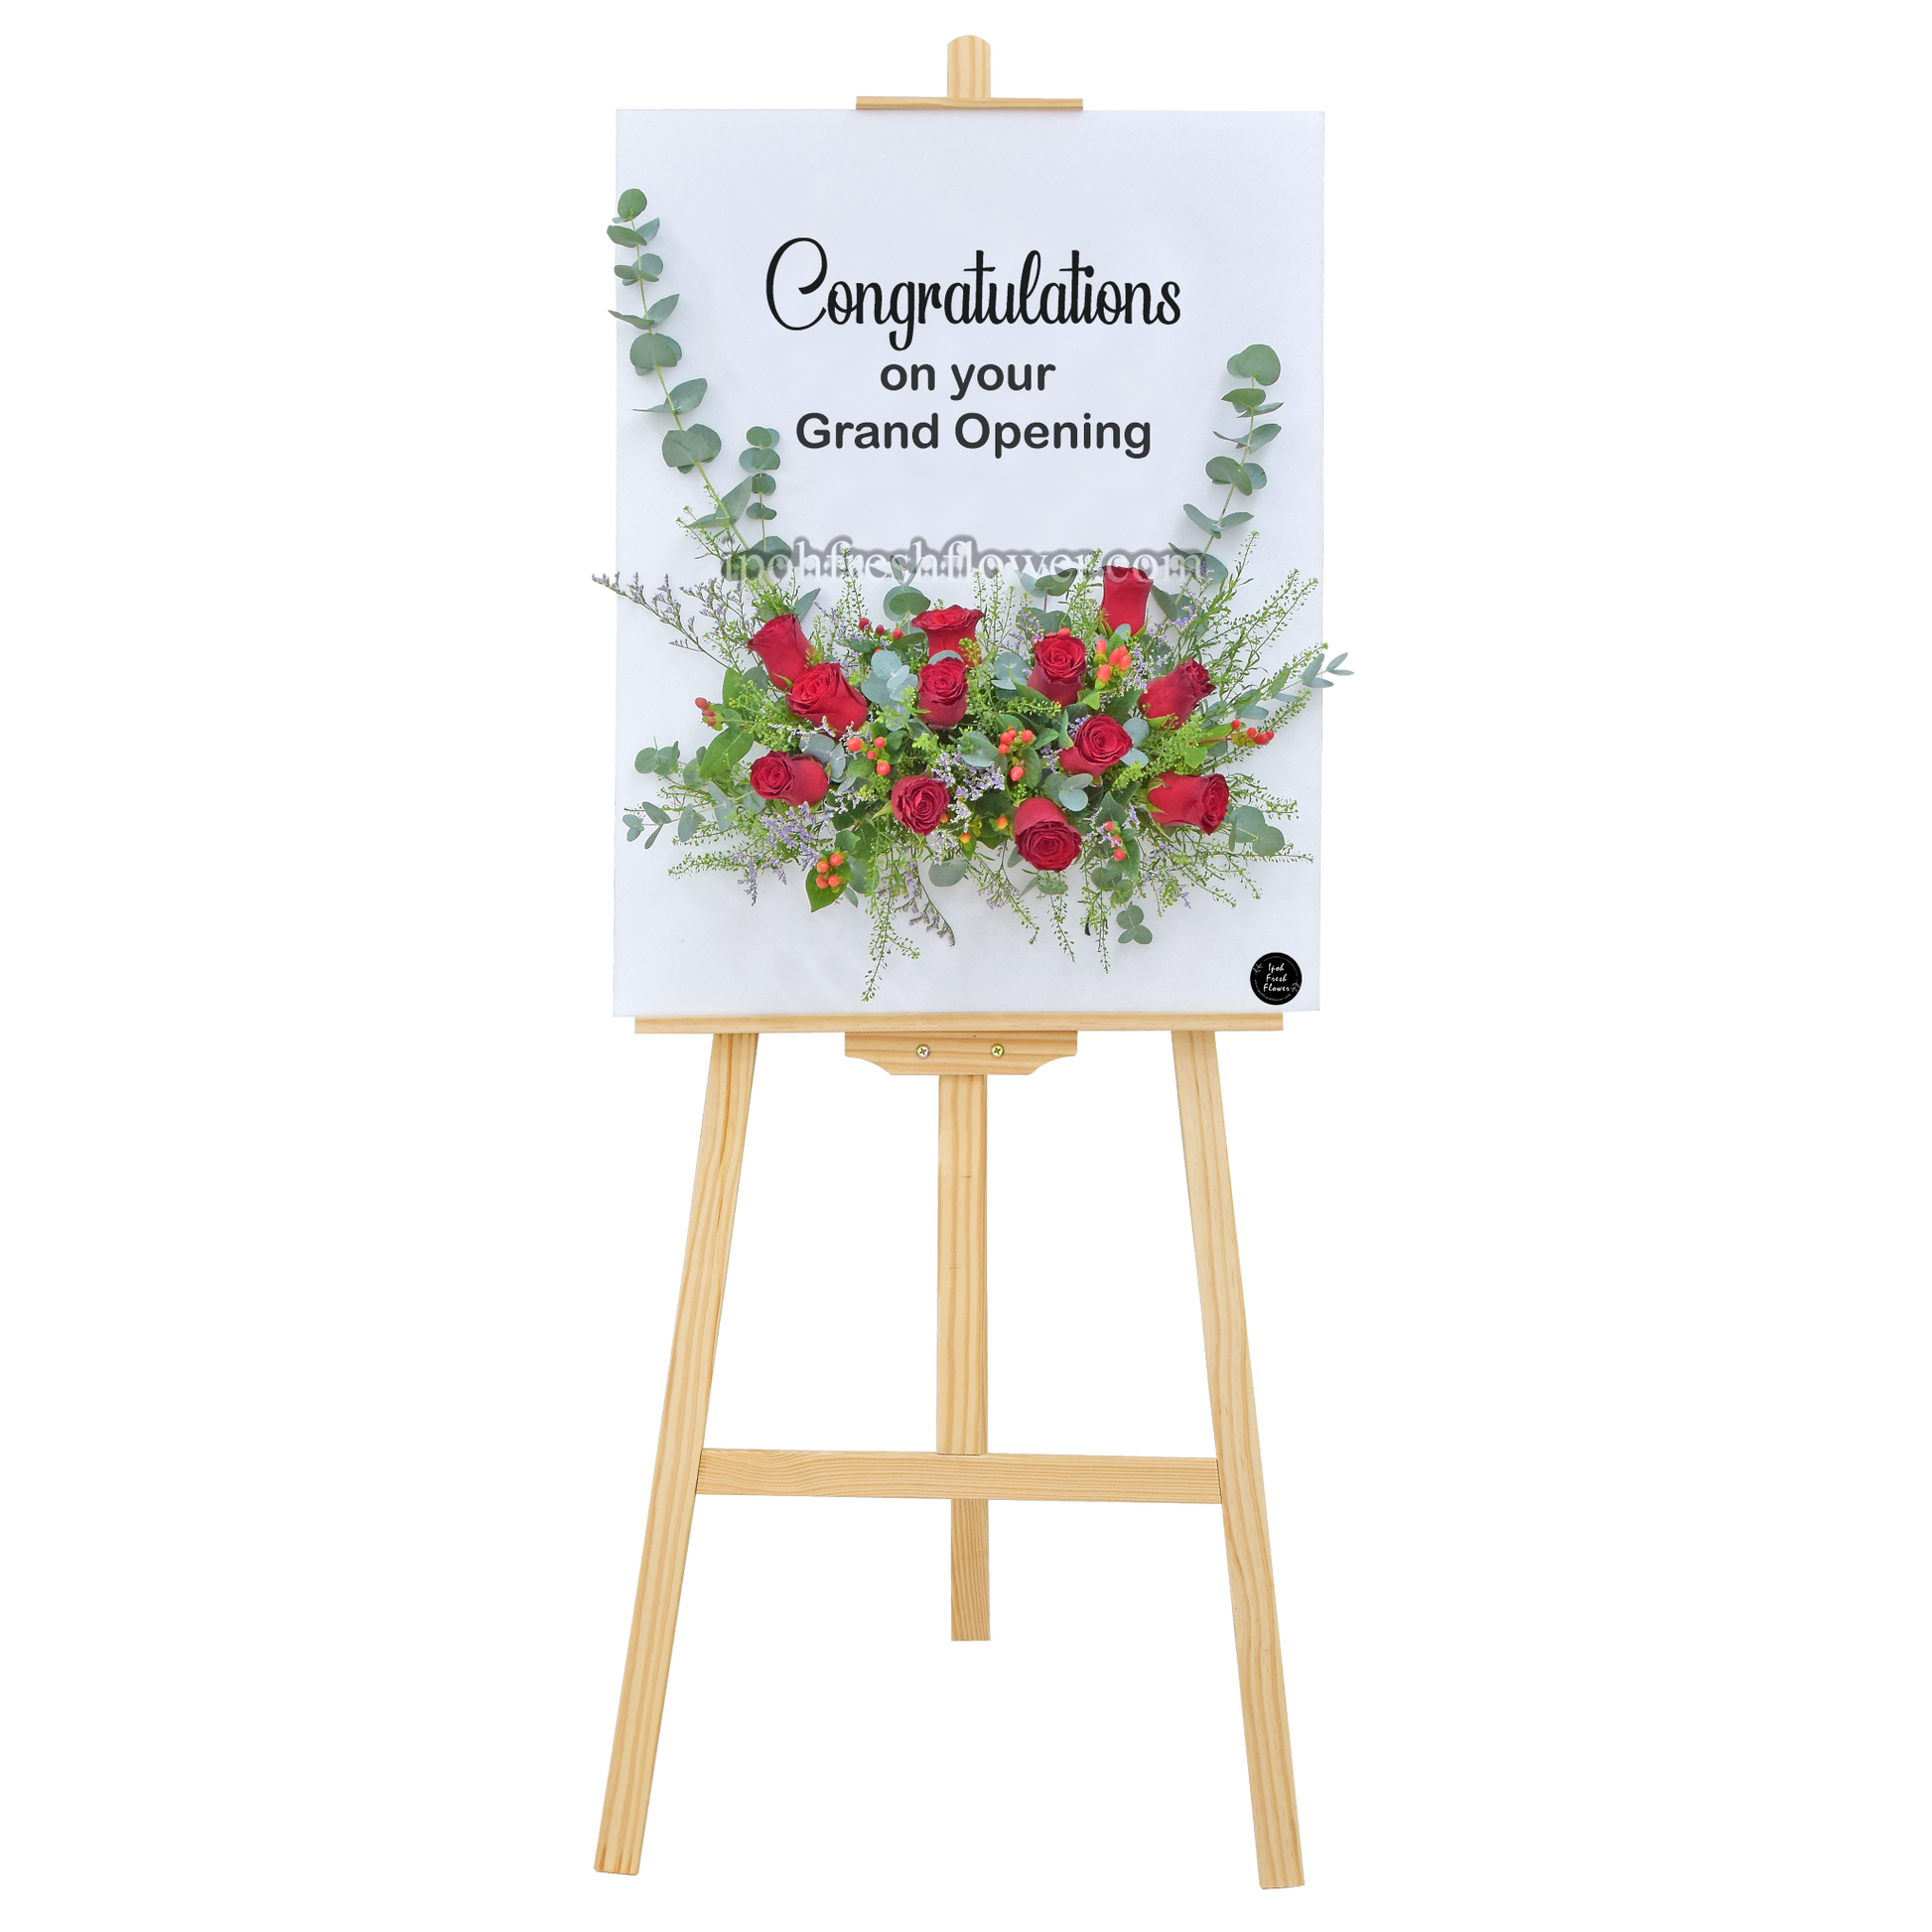 Oriental Scents| Grand Opening Fresh Flowers Board Stands & Congratulations flowers